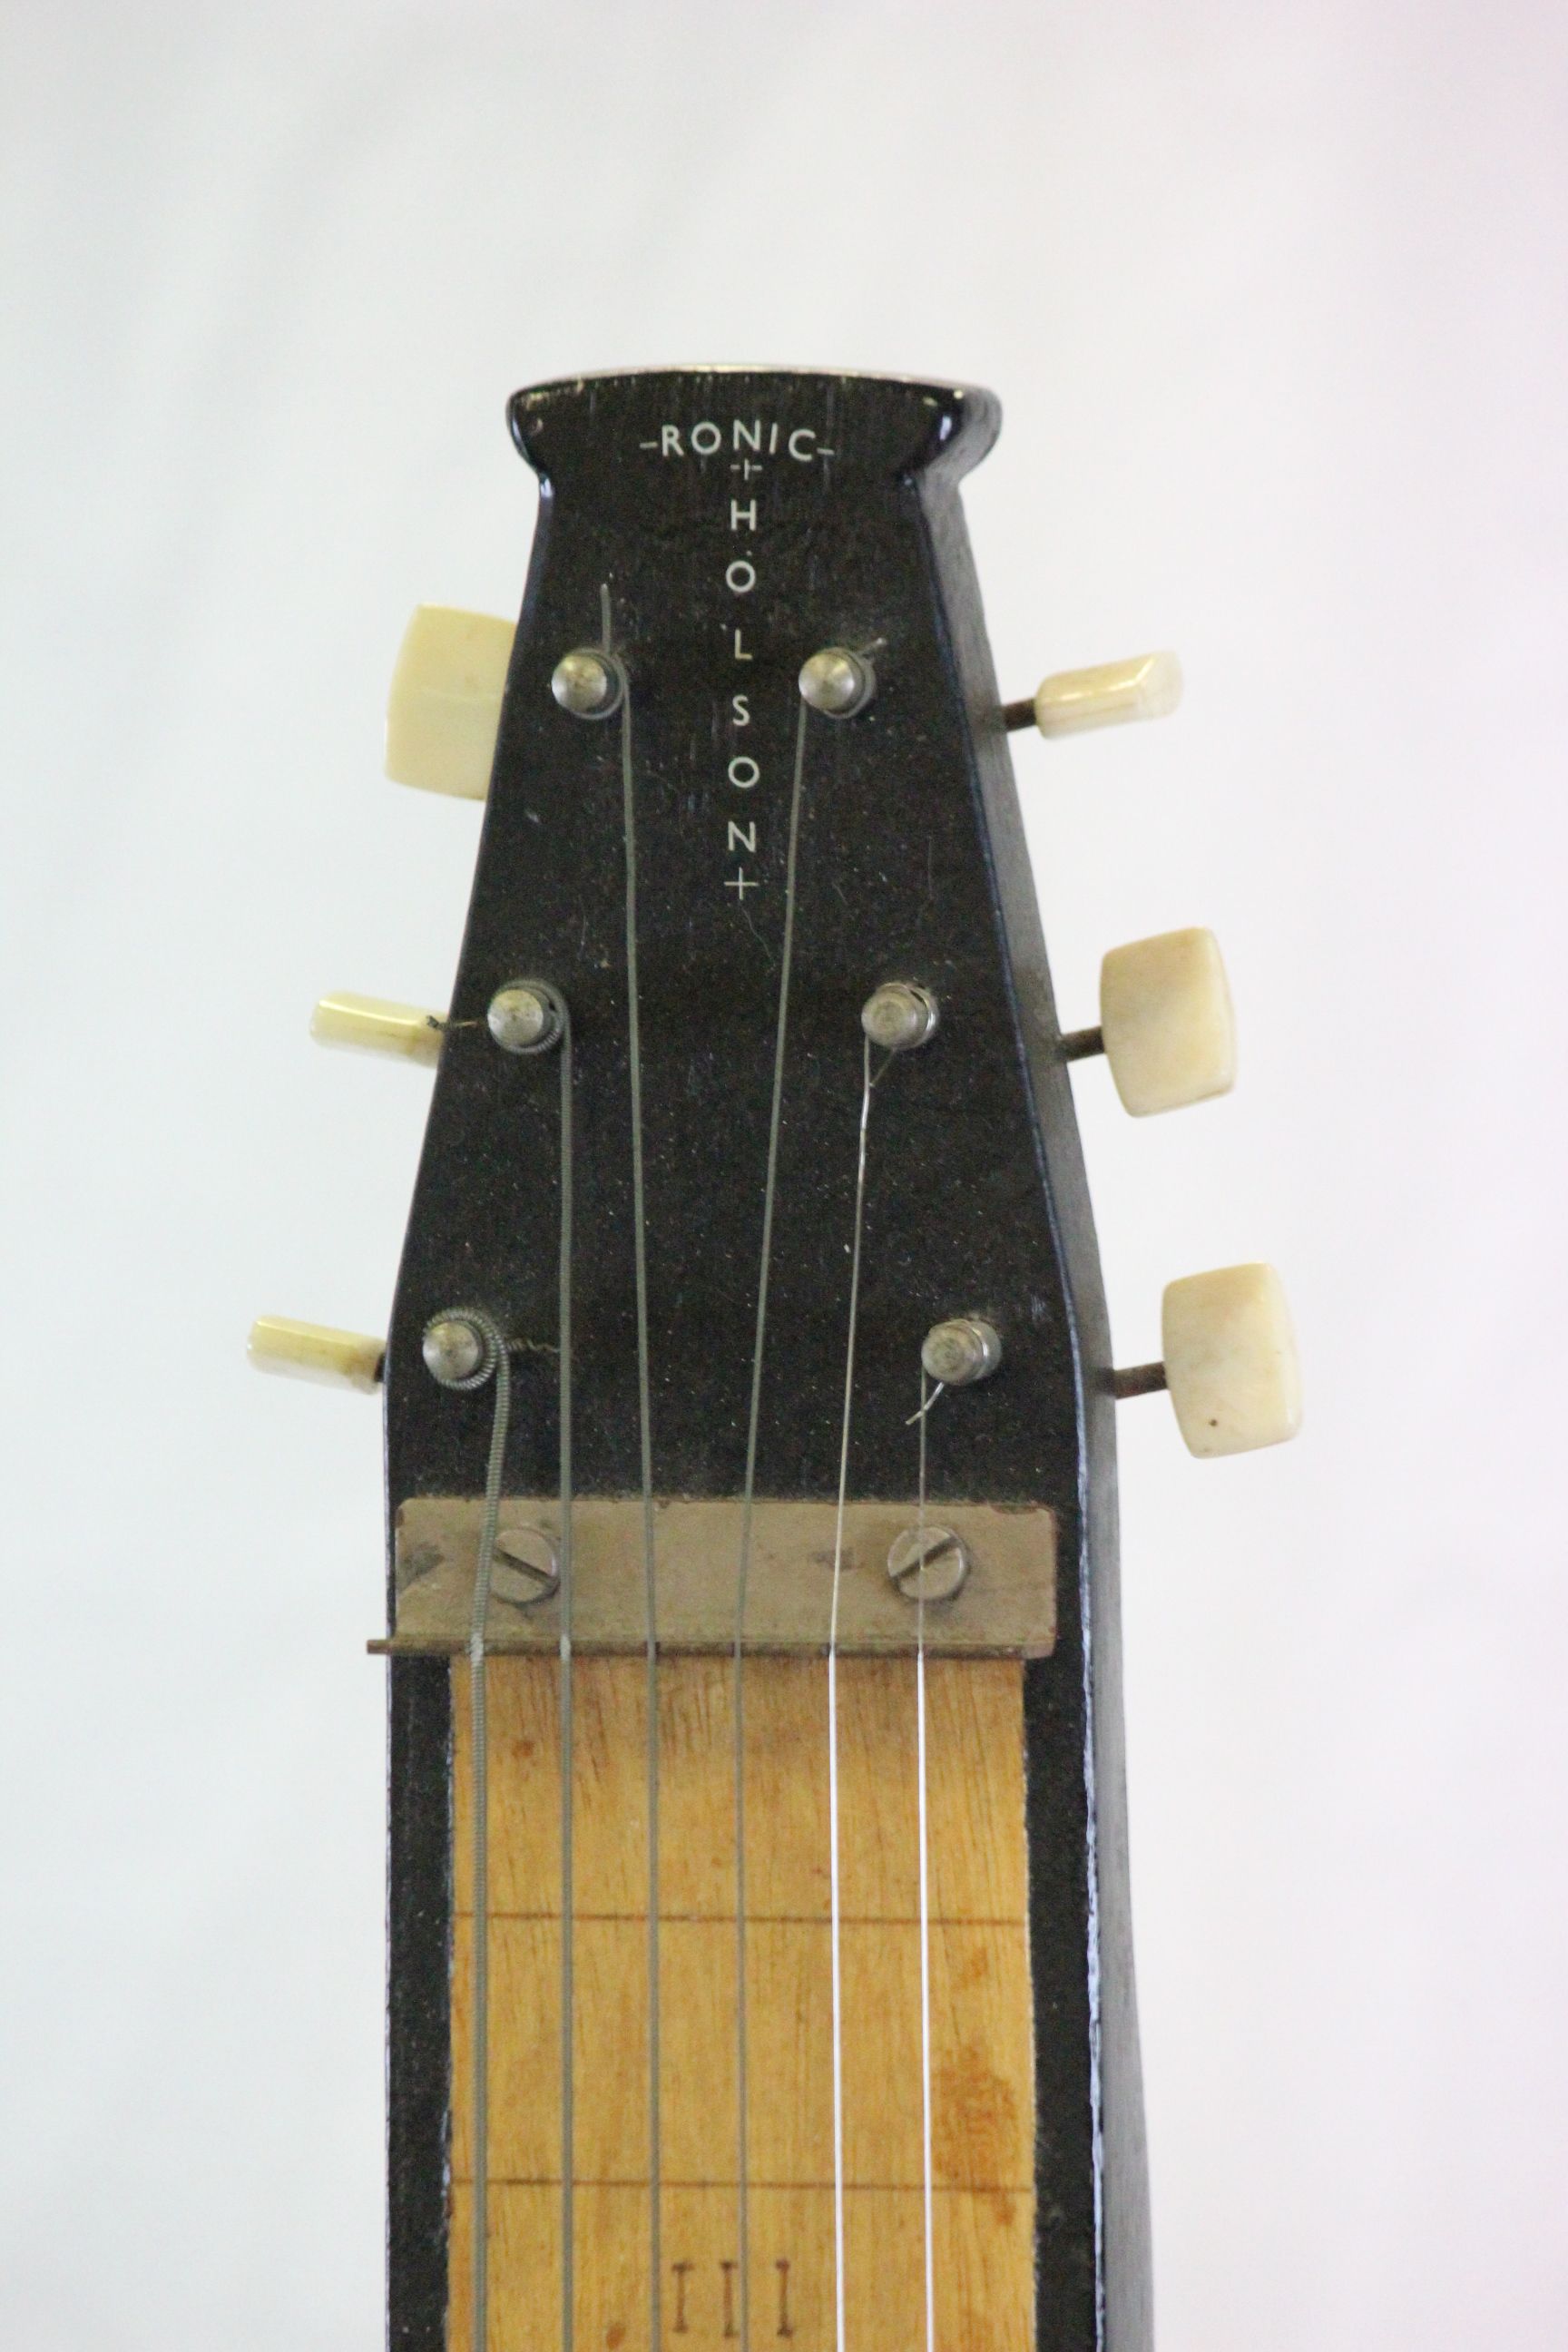 Old lap steel guitar by Ronic Holson in soft bag - Image 3 of 3